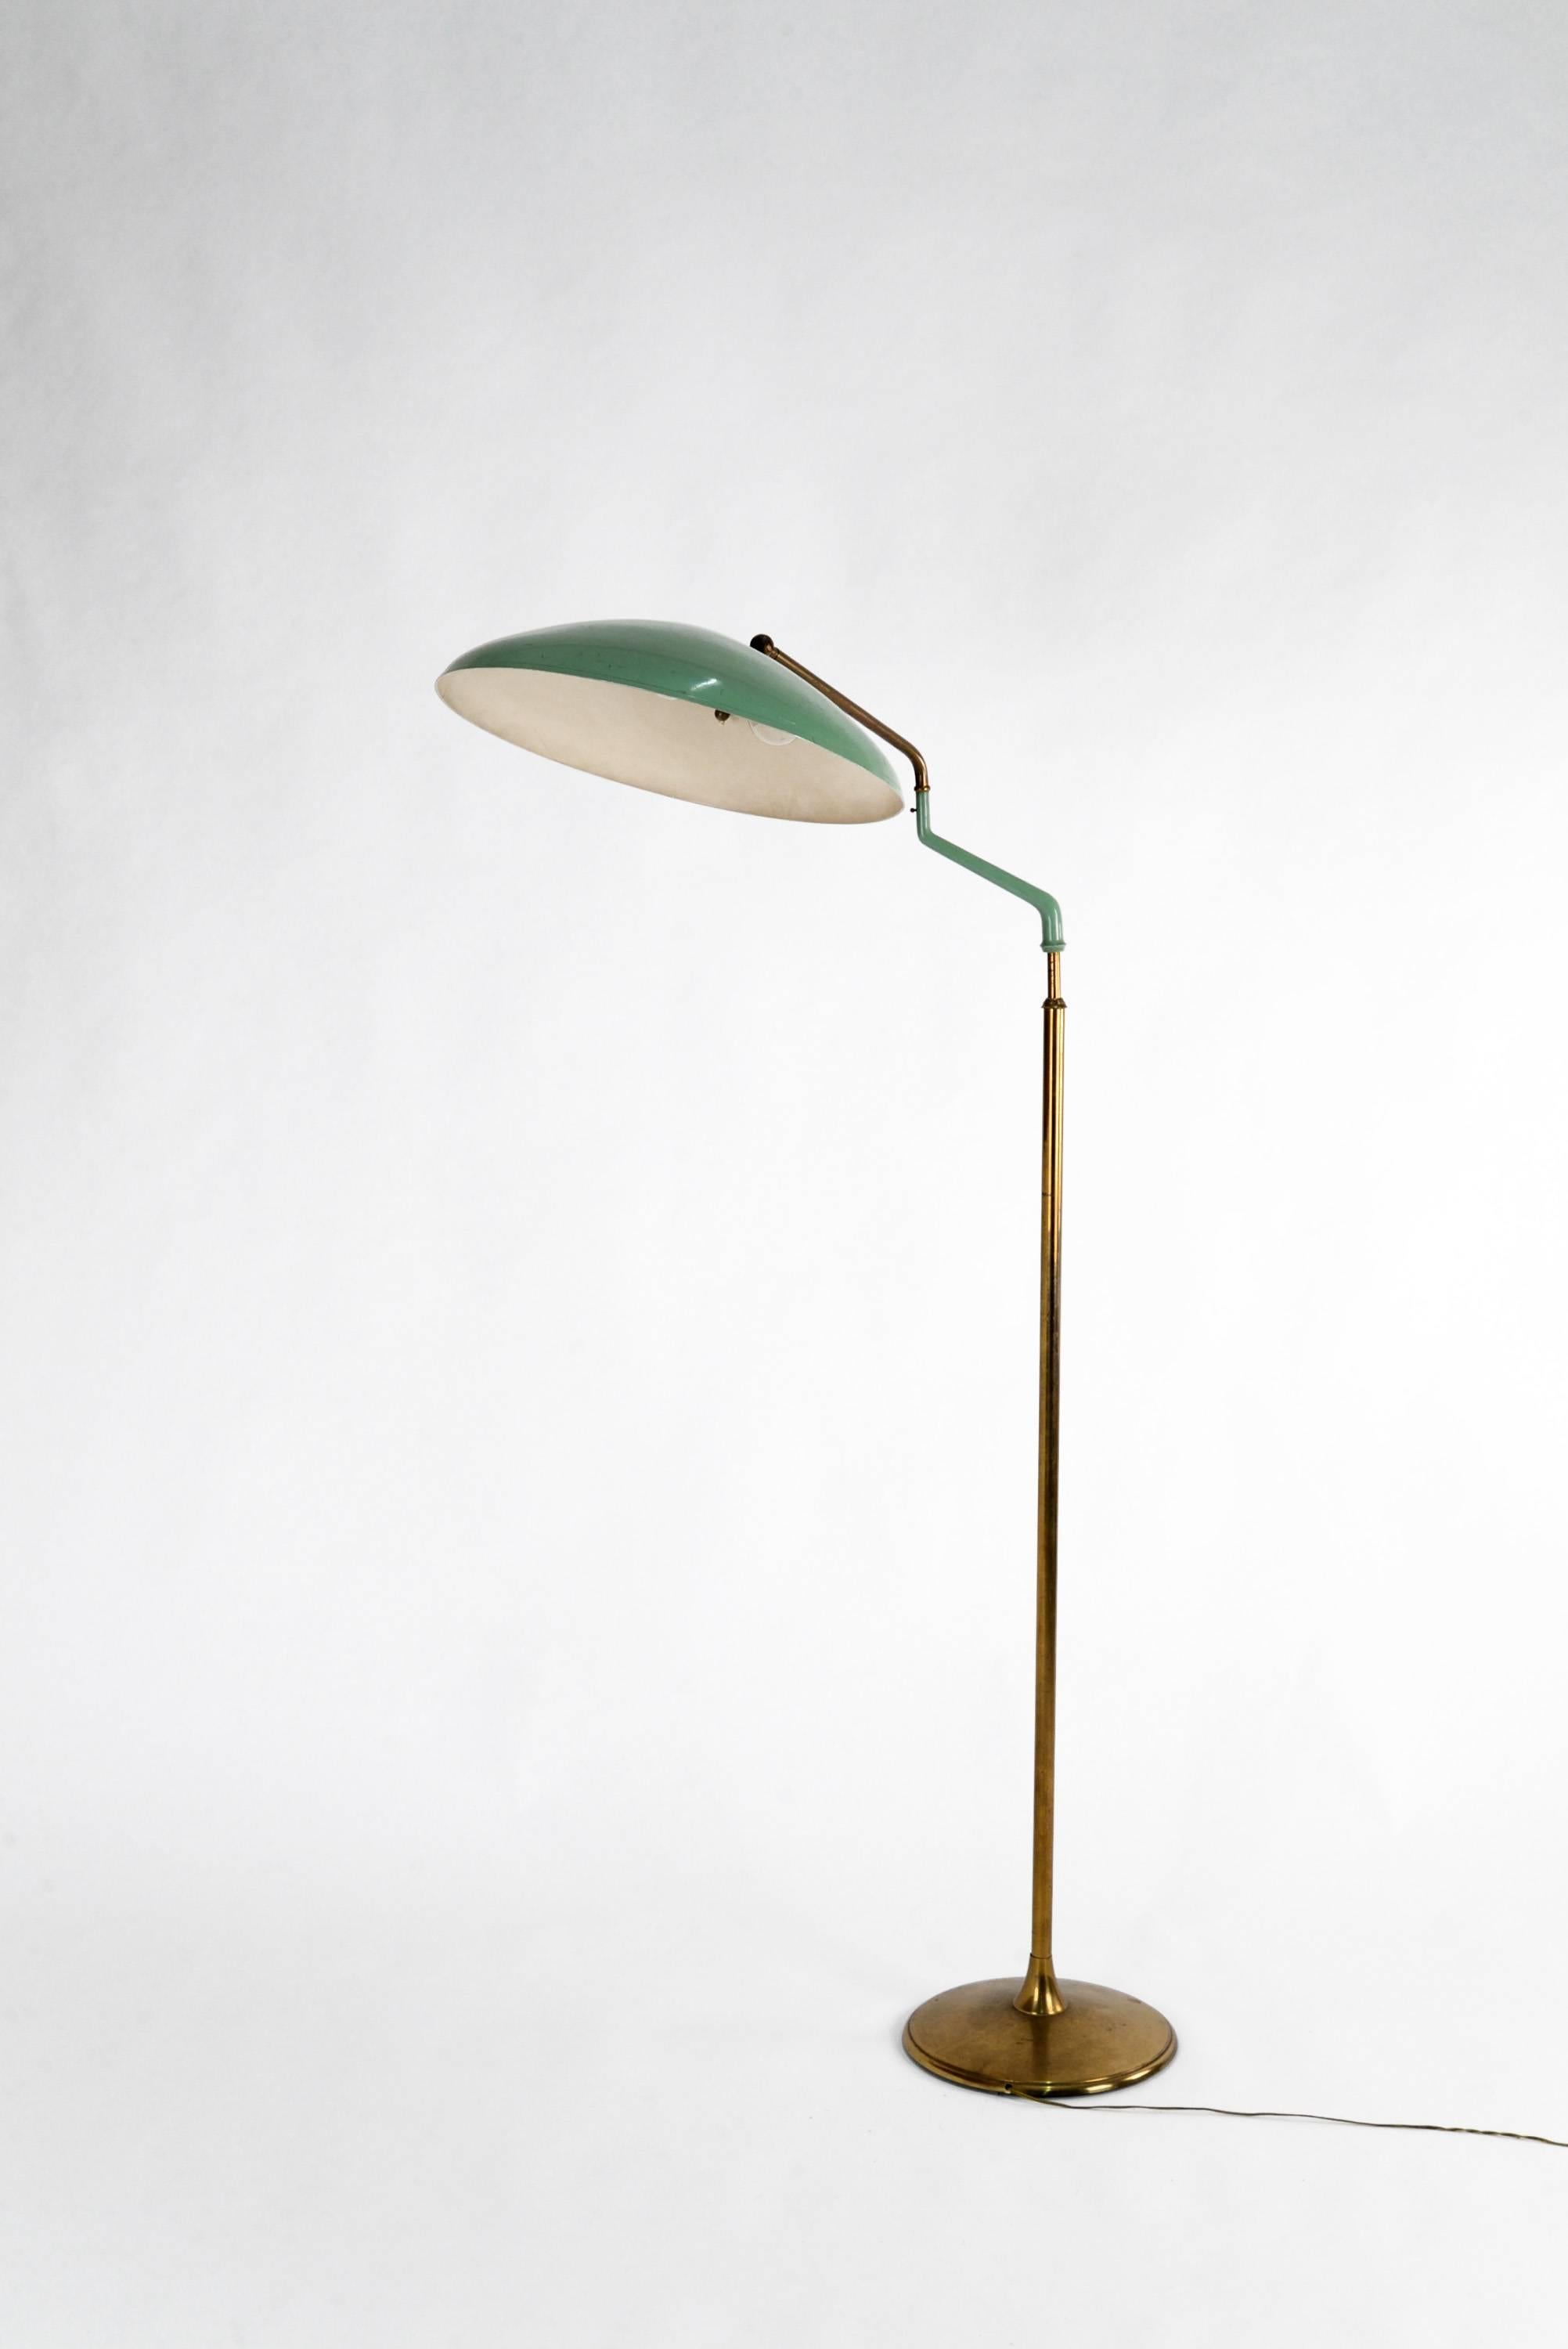 Elegant and rare adjustable floor lamp manufactured by Lumi in the 1950s. Brass base, stem and joints, green lacquered metal shade. Good original vintage conditions, charming patina. Adjustable height.